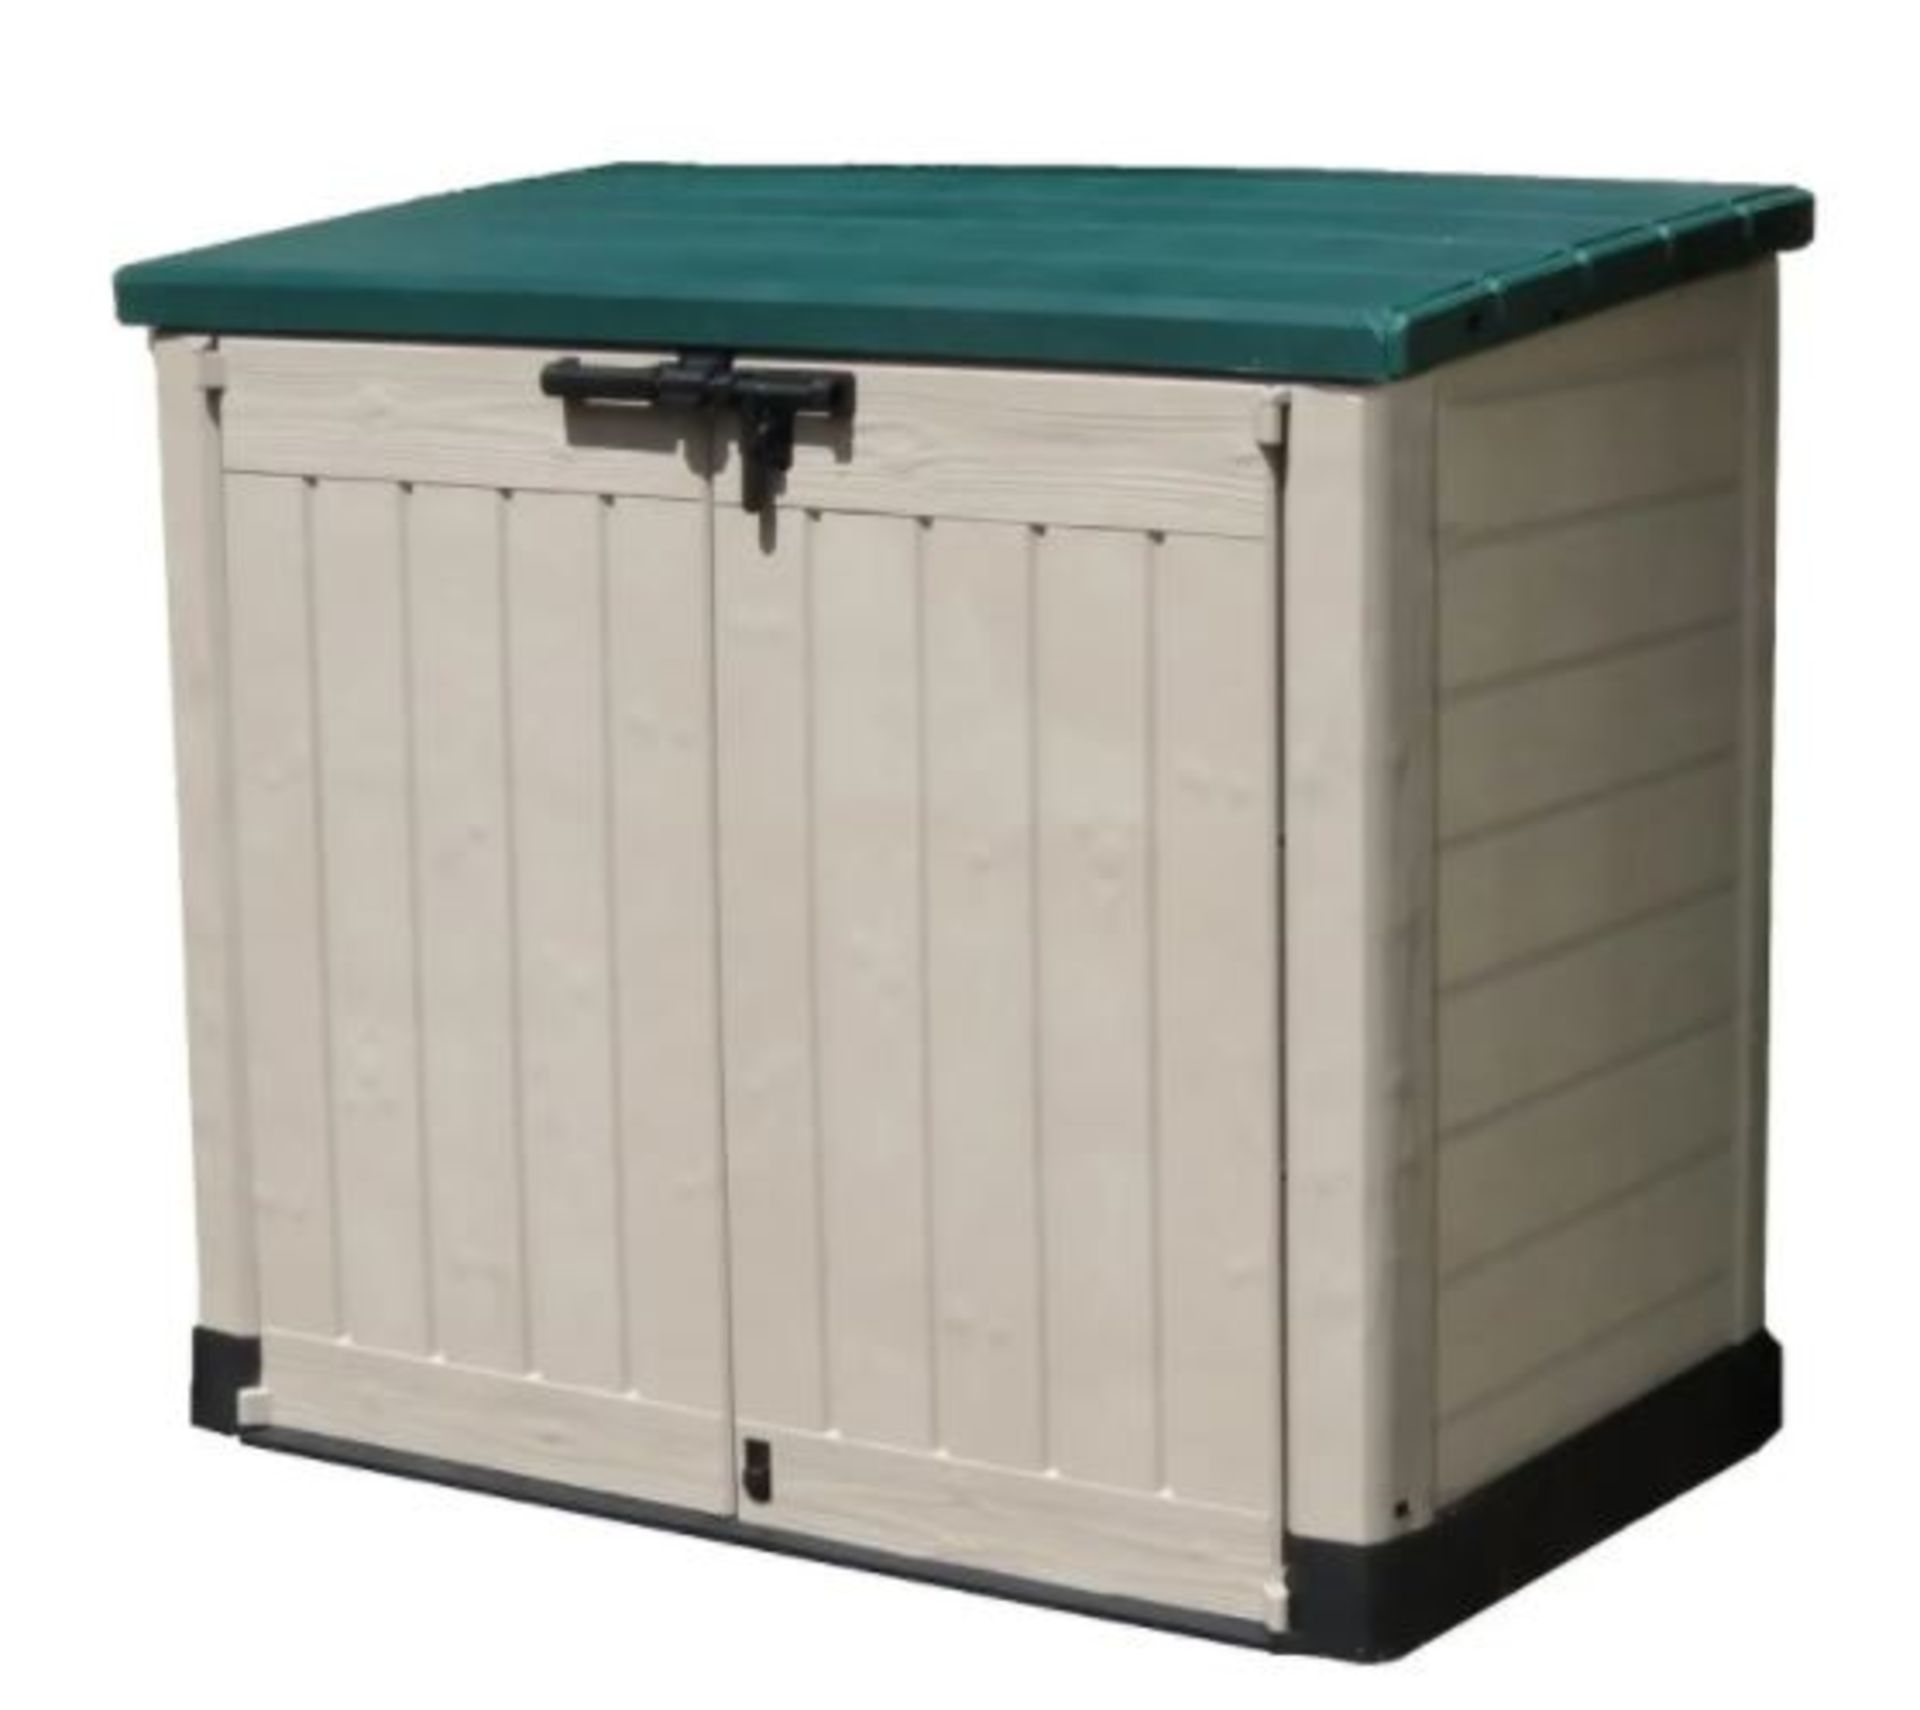 1x Keter Store It Out Max RRP £160. 1200L Beige And Green (H125x W145.5x D82cm) - Image 4 of 7